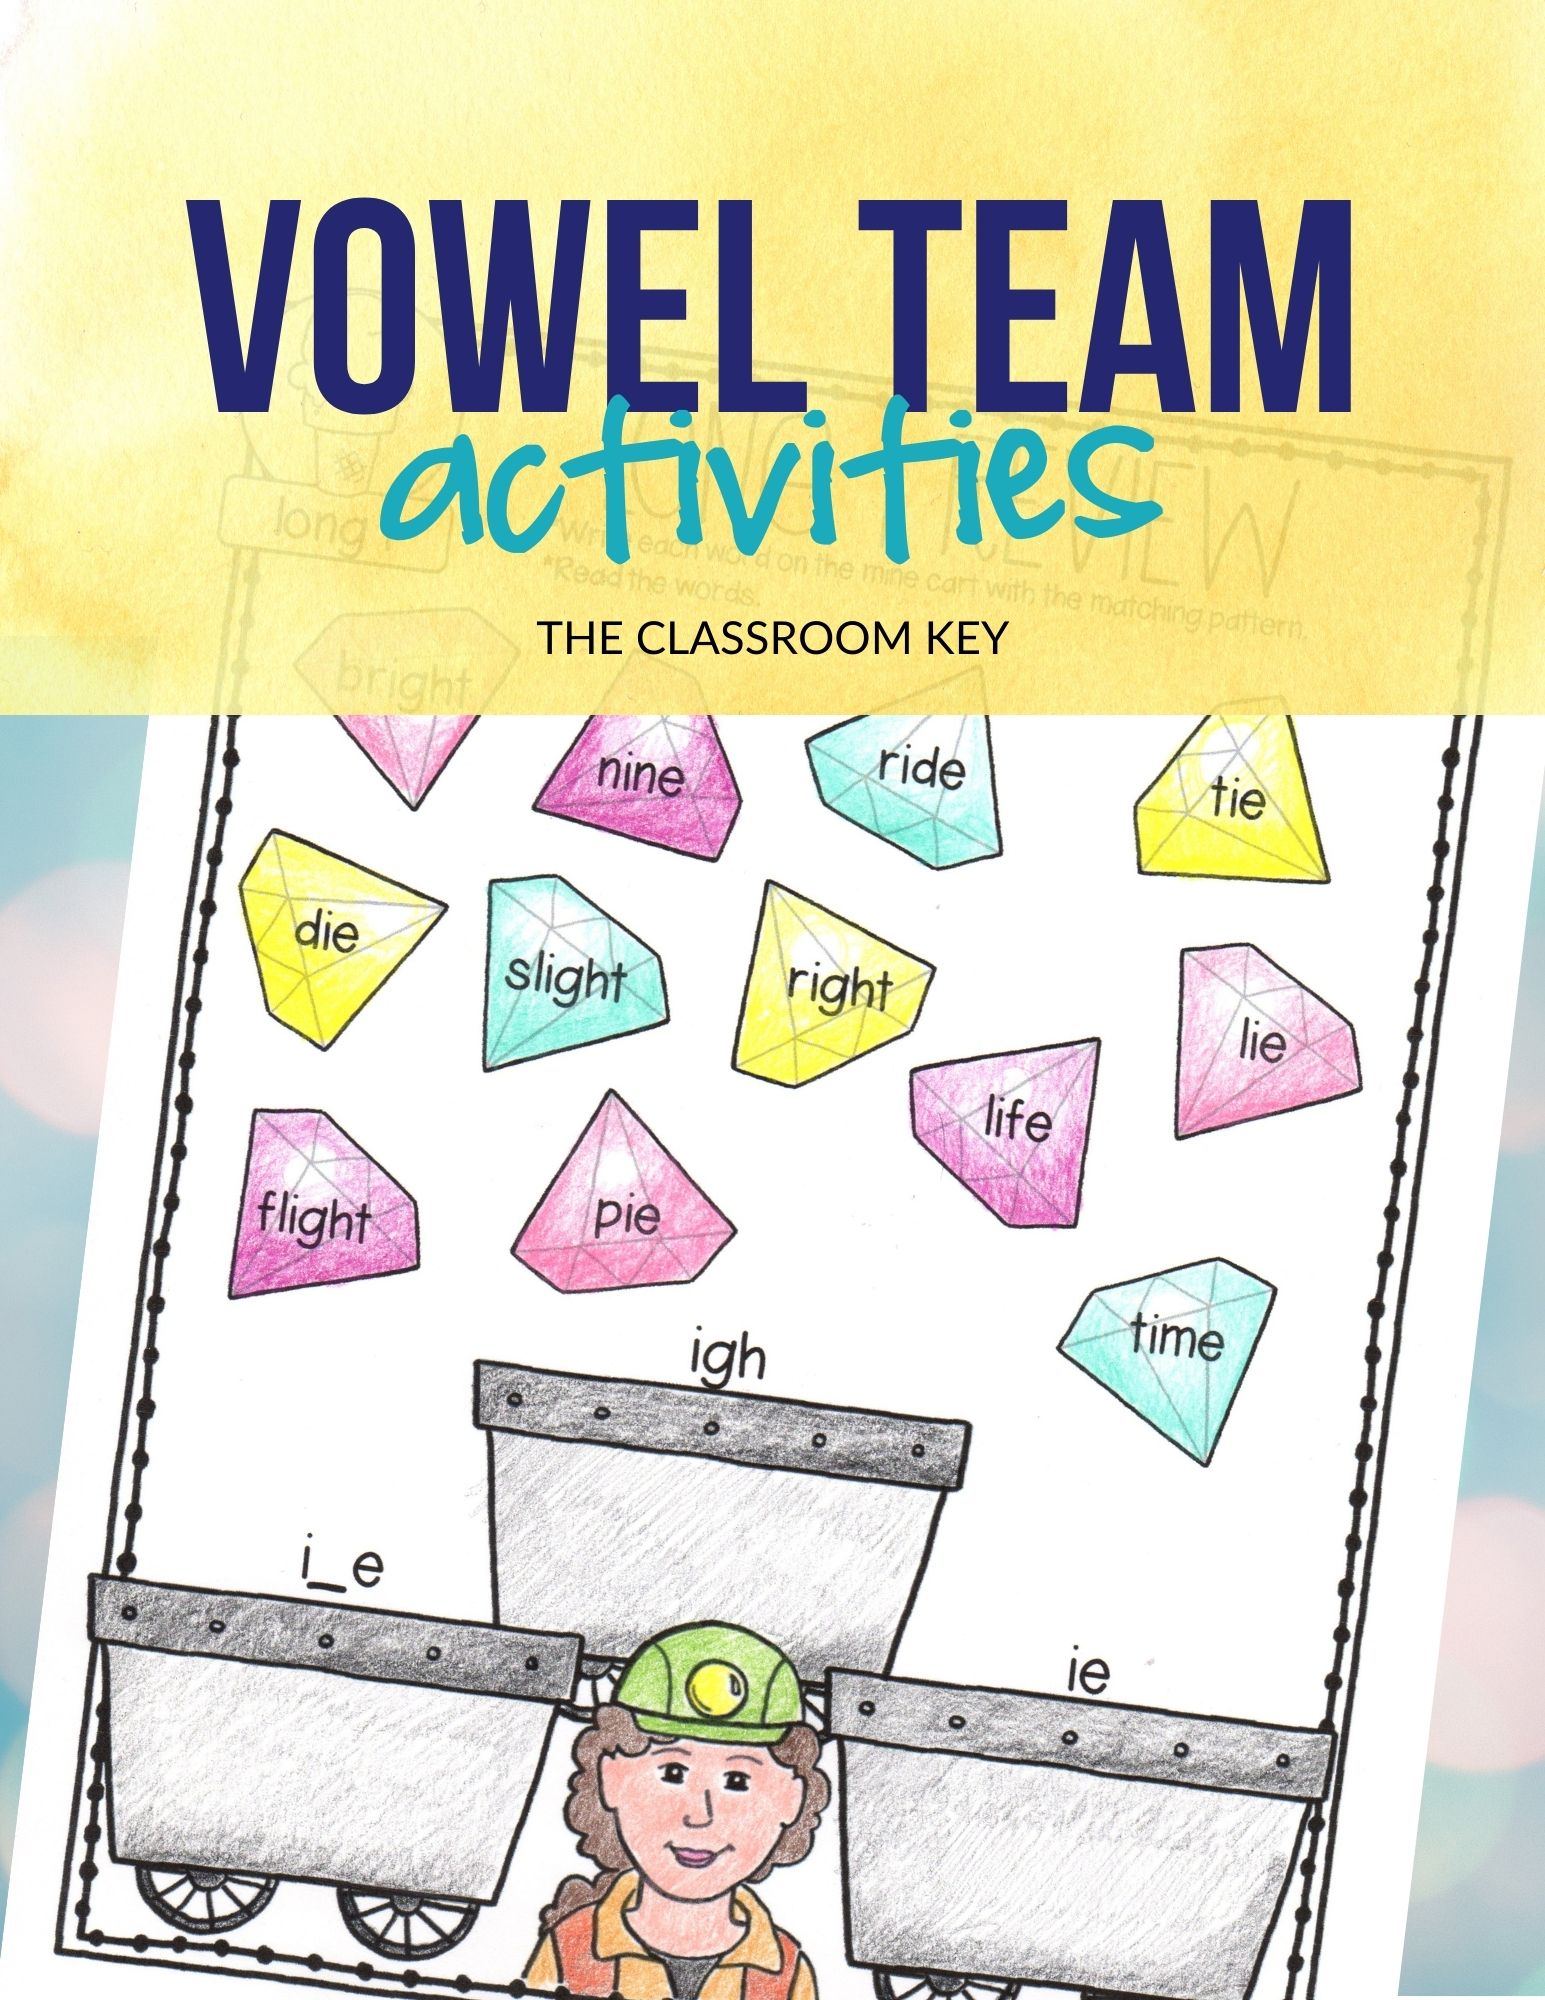 Vowel team practice activities, teach phonics effectively with no-prep printables for 2nd or 3rd grade